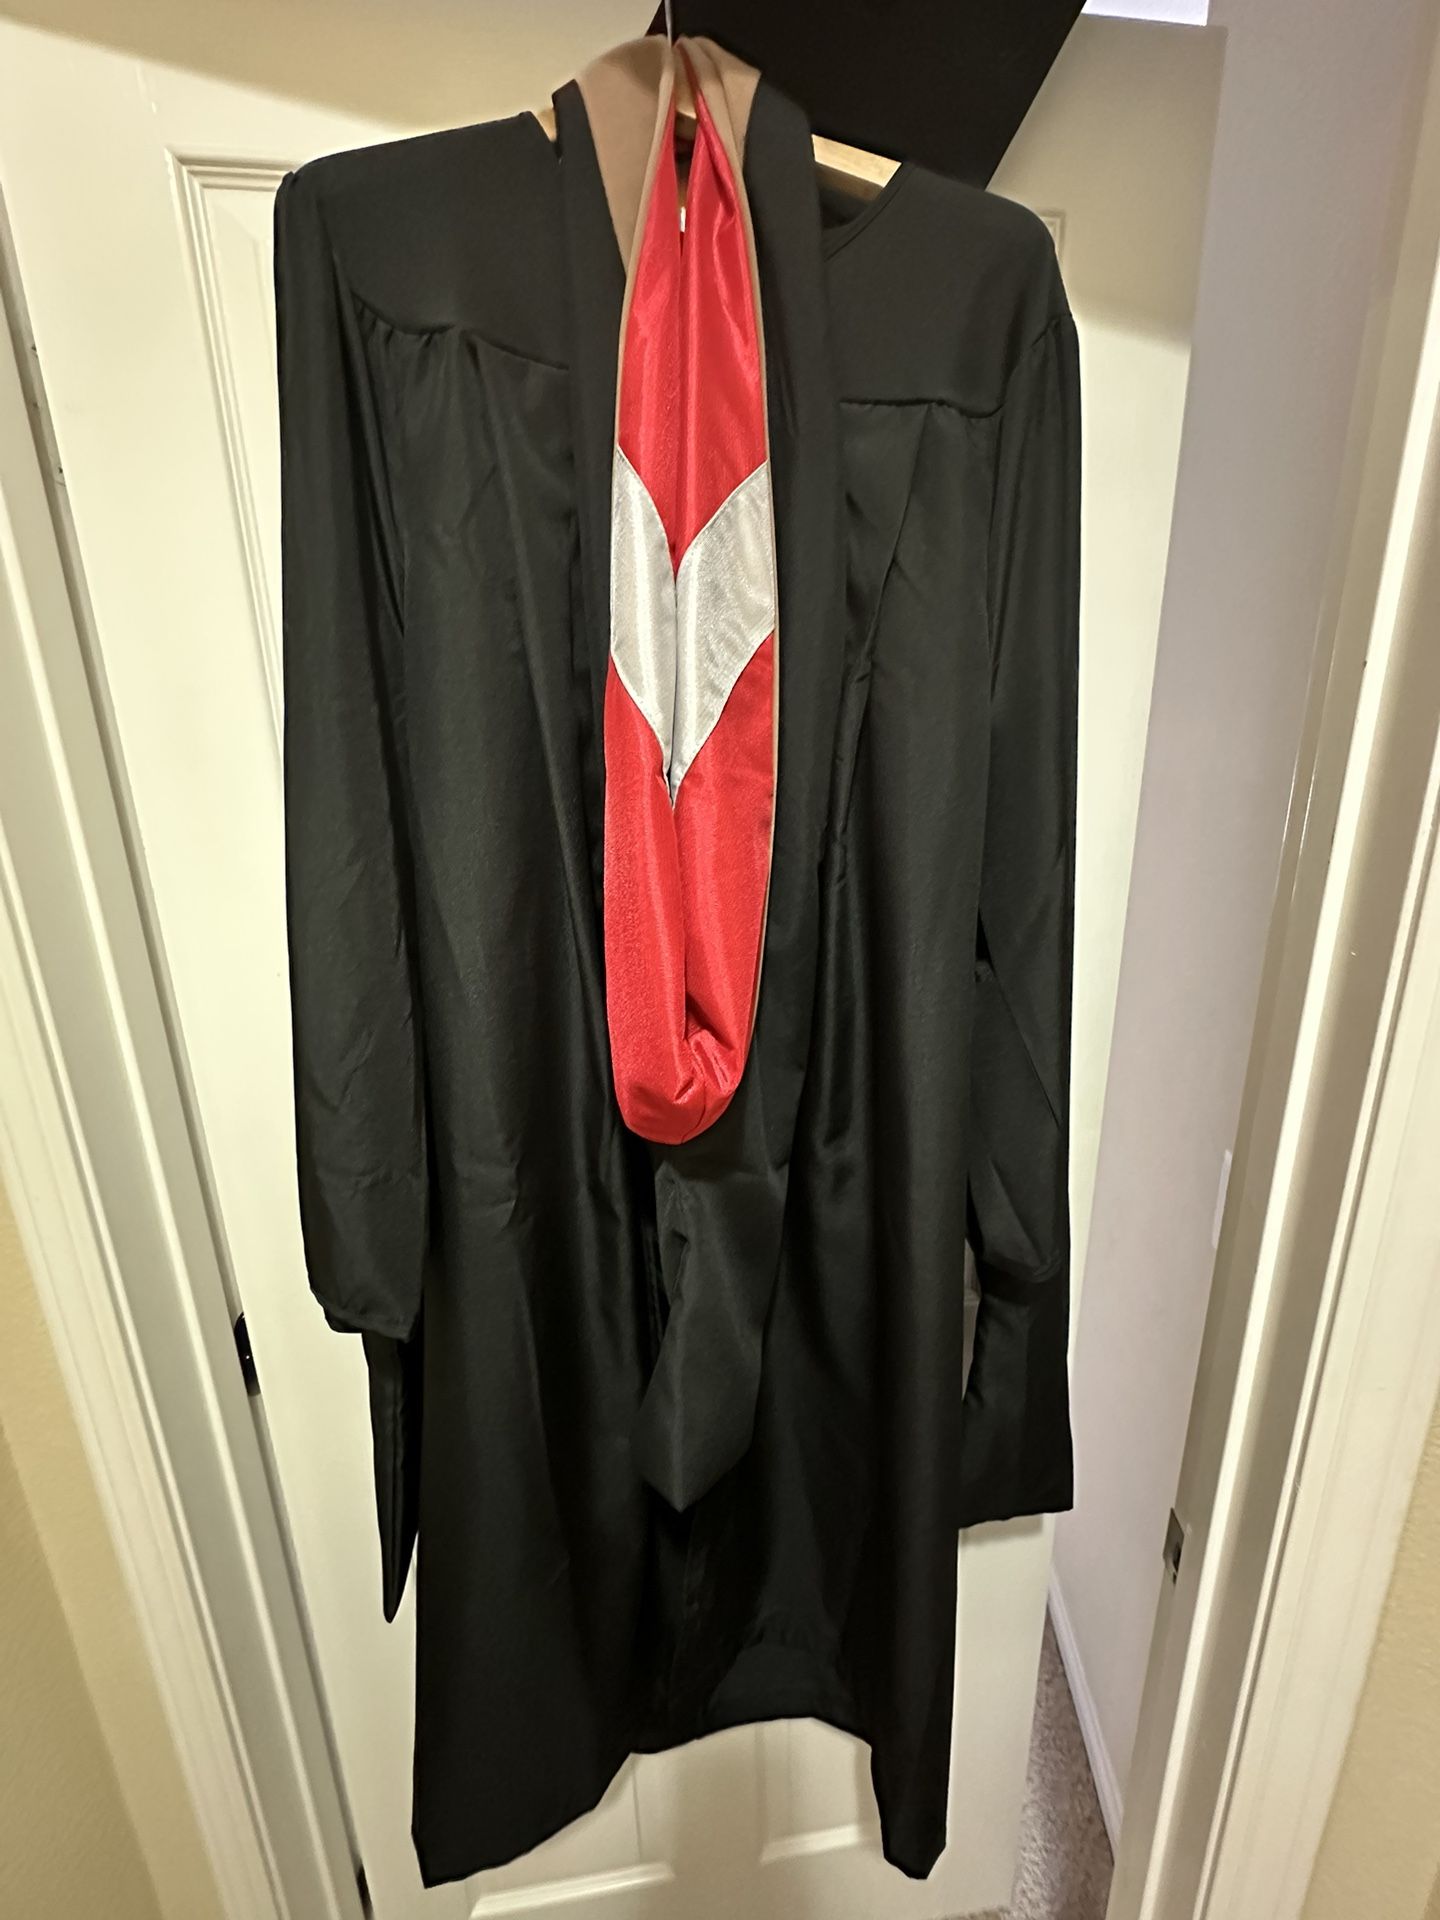 Masters Cap & Gown